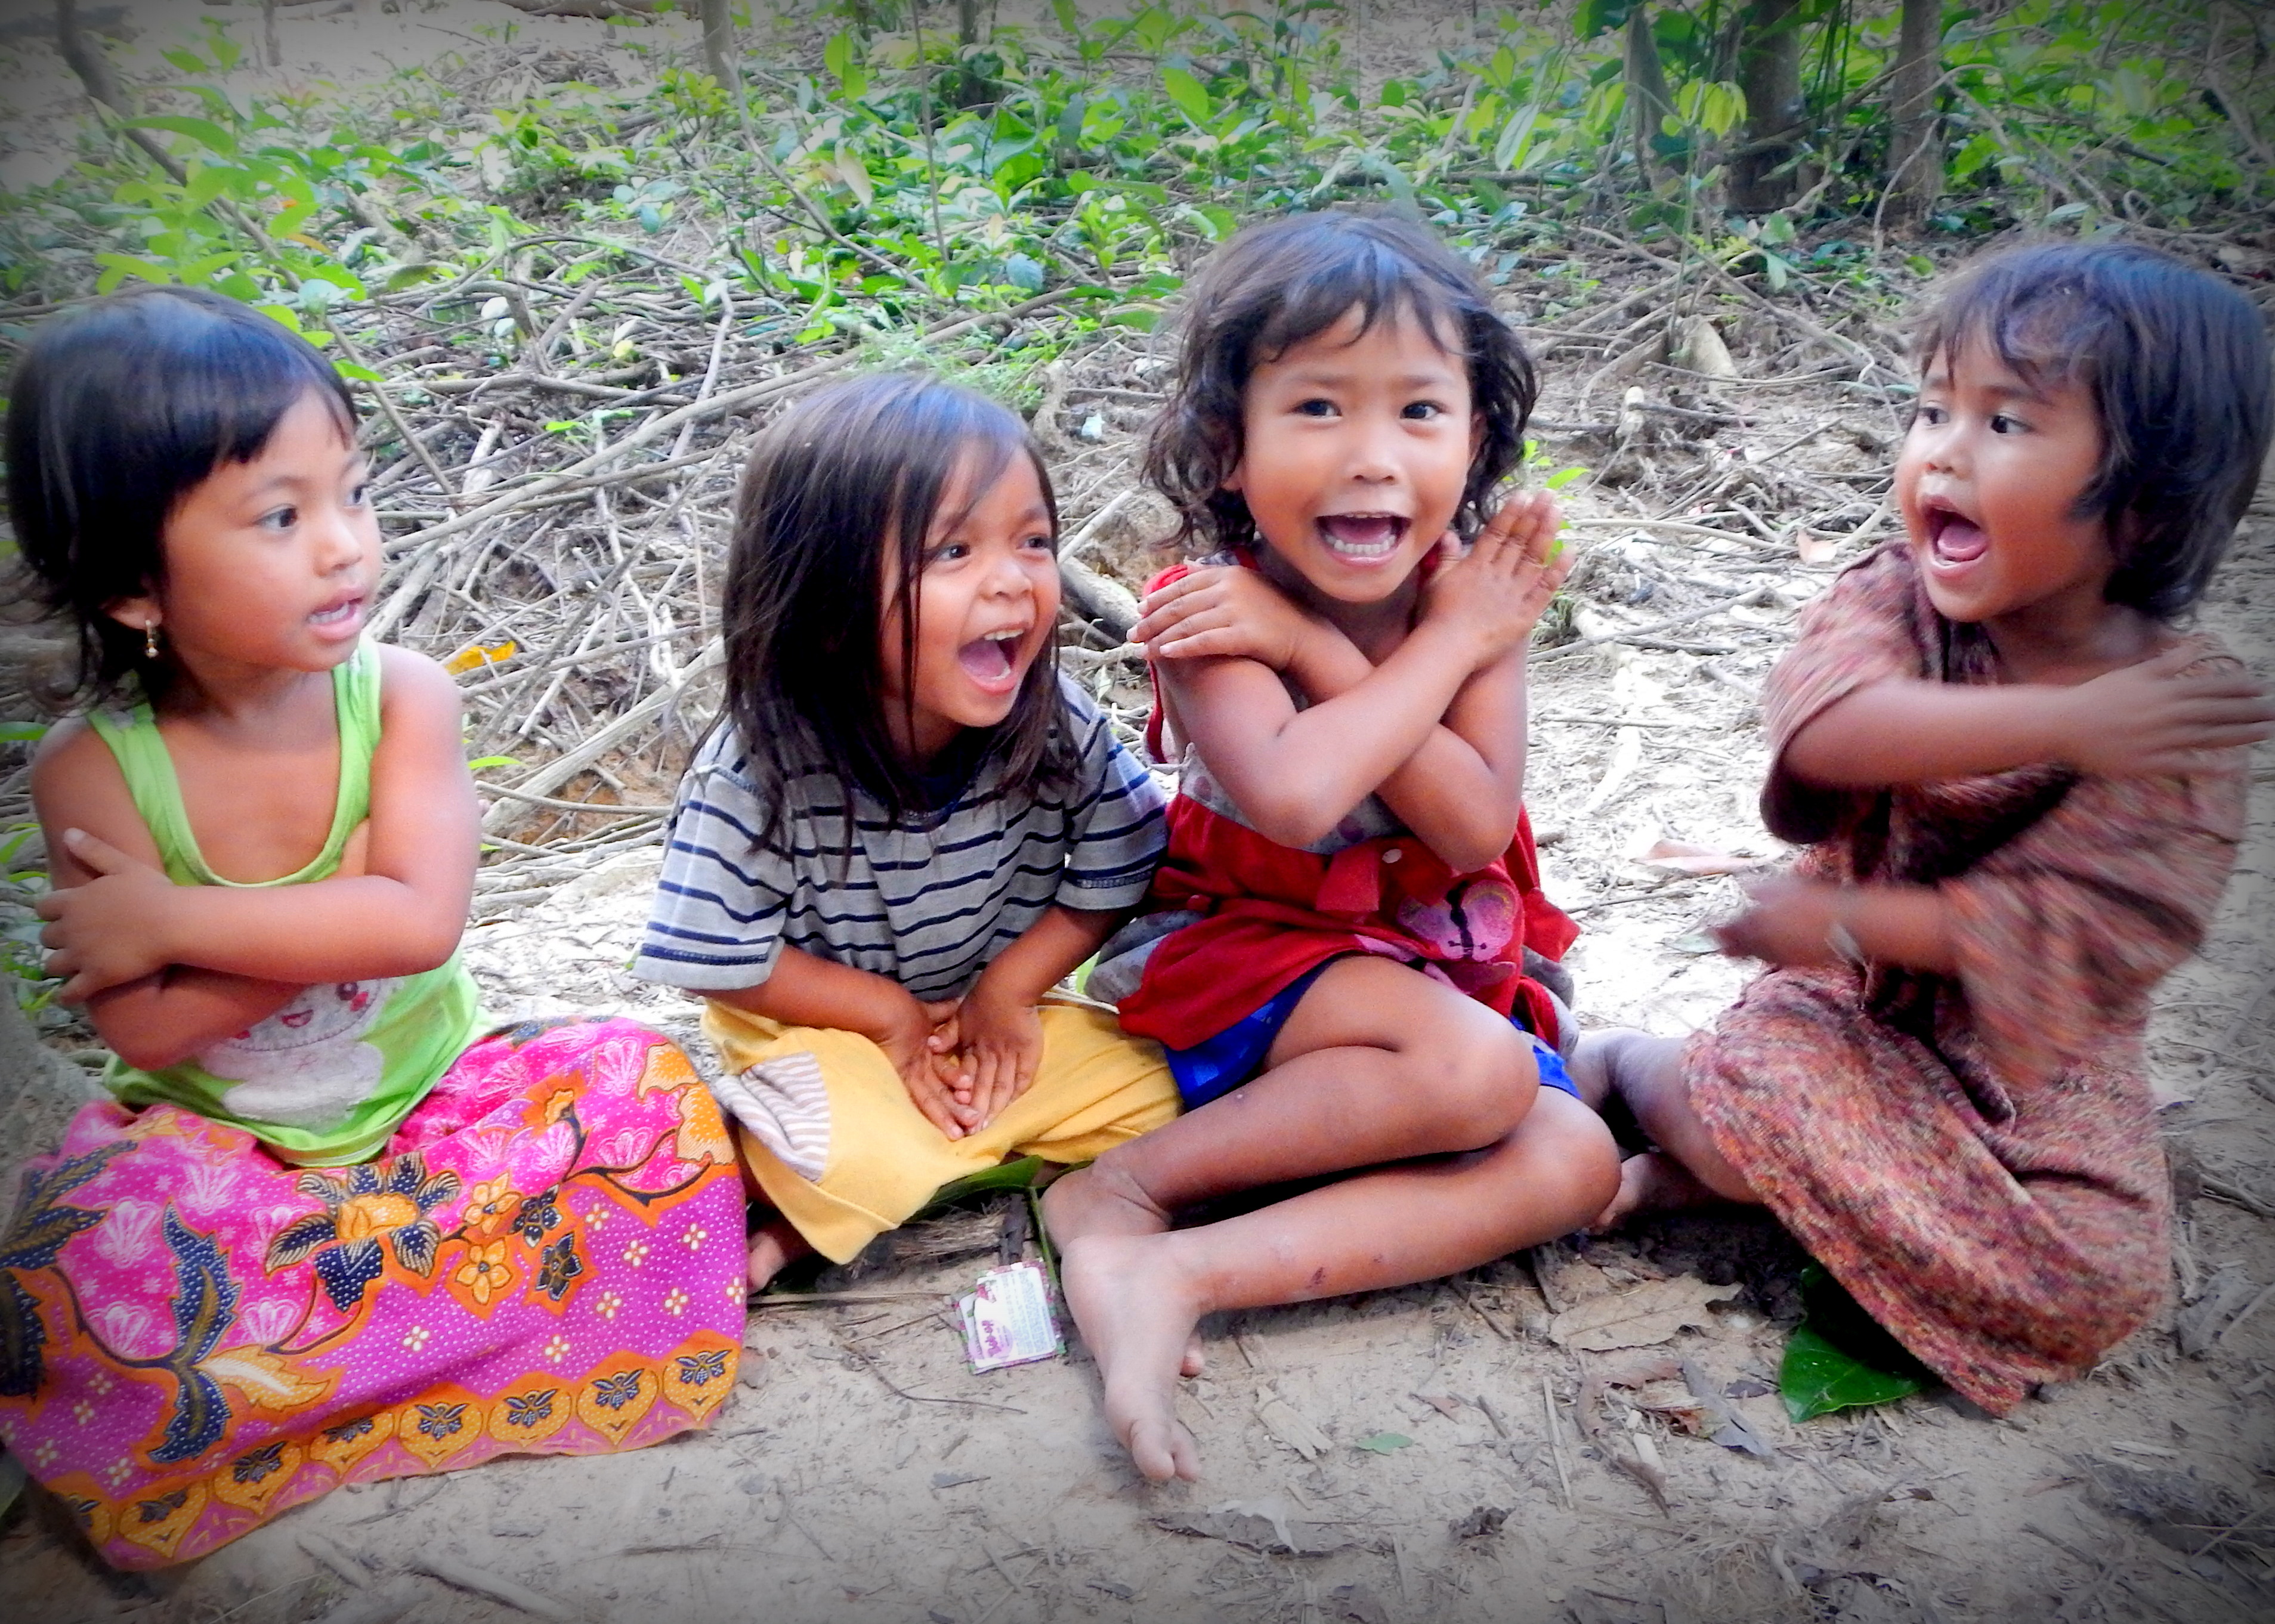 These Cambodian girls were singing and dancing